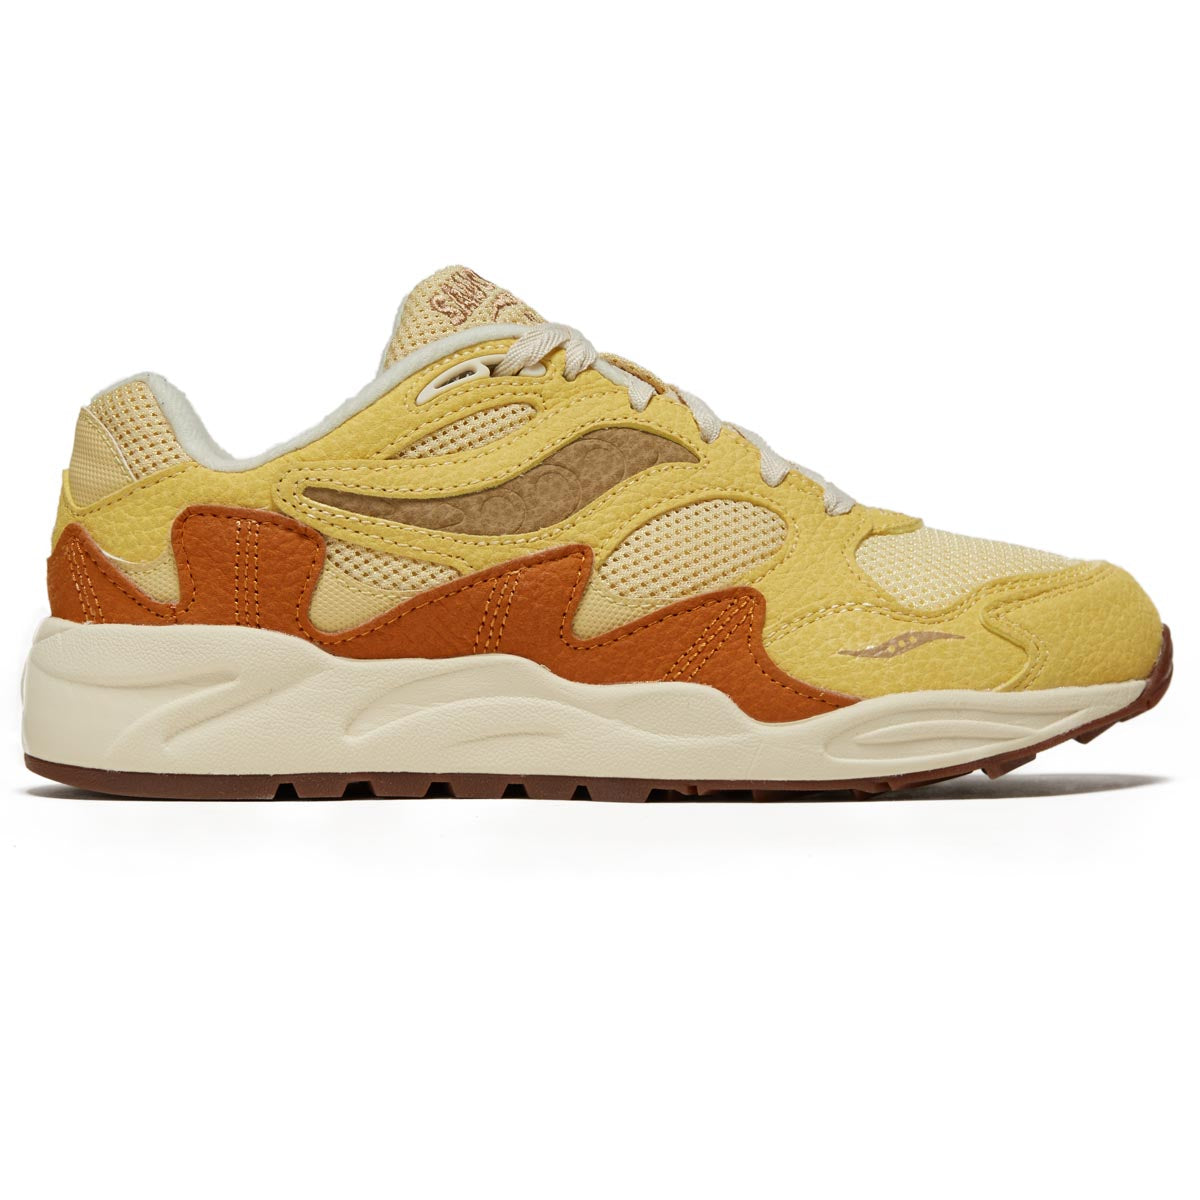 Saucony Grid Shadow 2 Shoes - Mustard/Tan